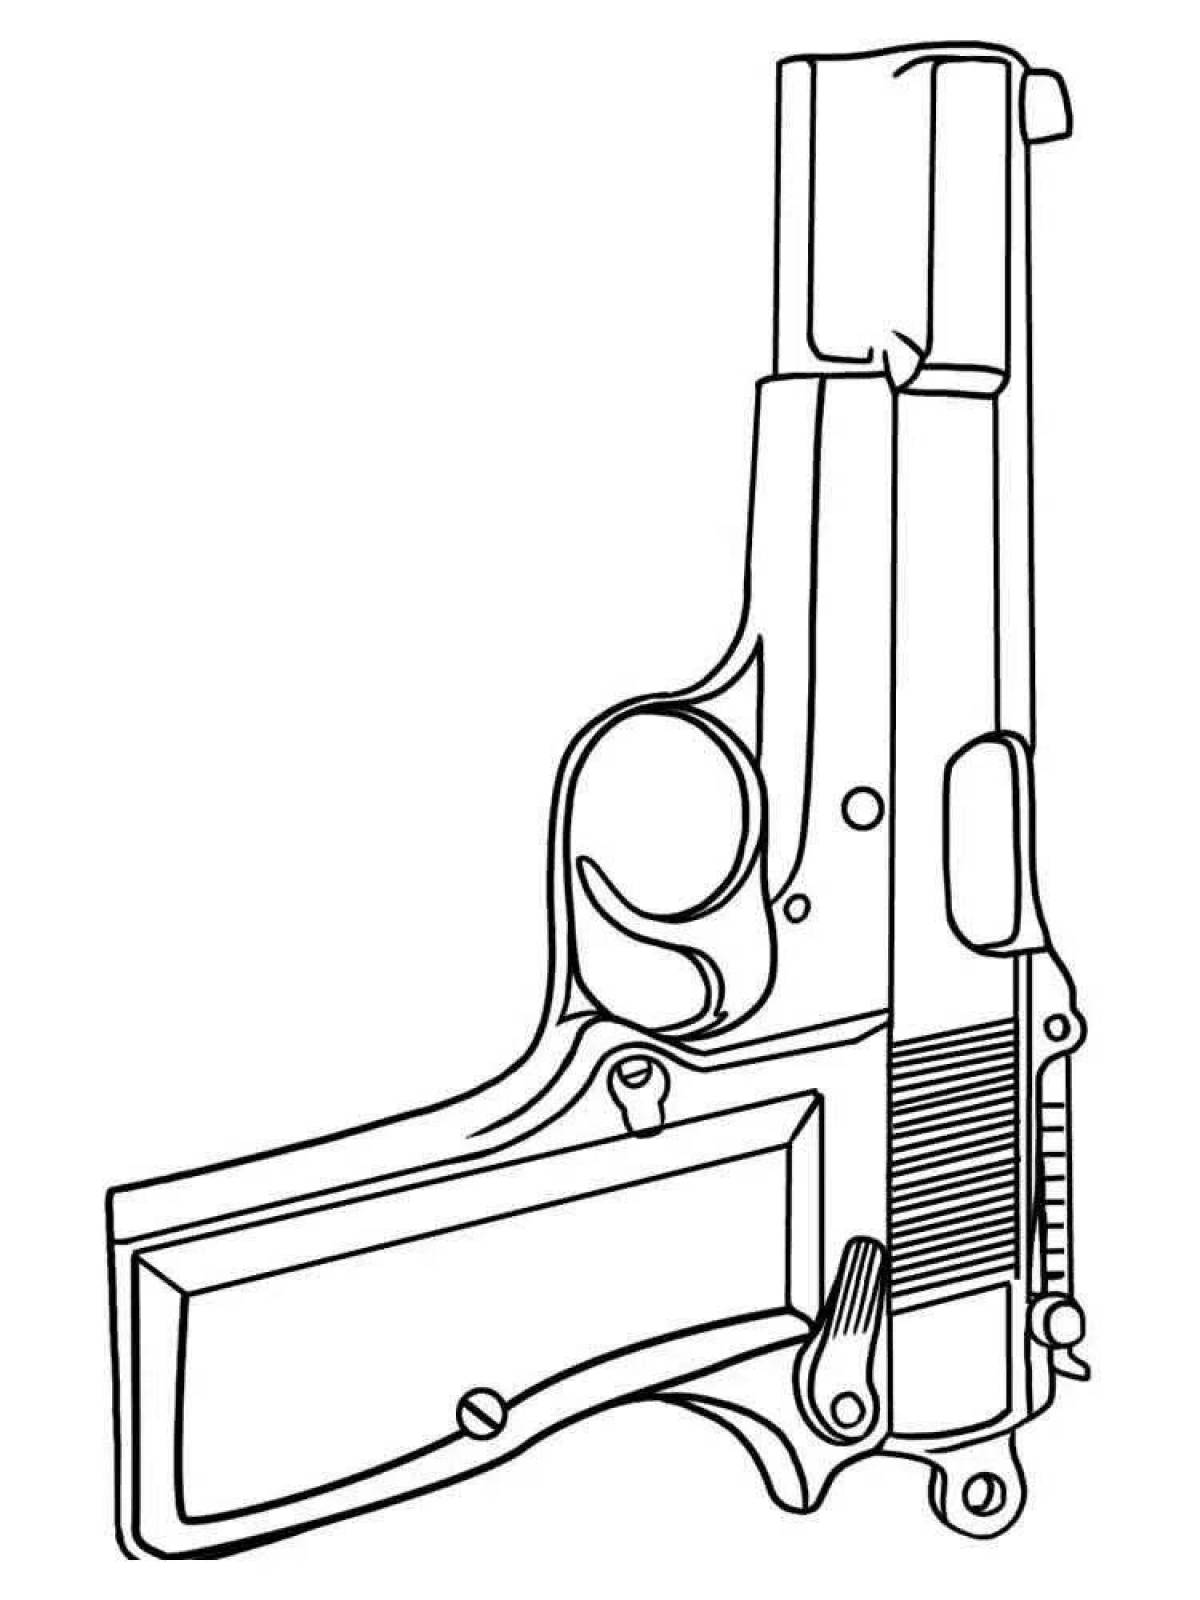 Bright coloring pages with two weapons